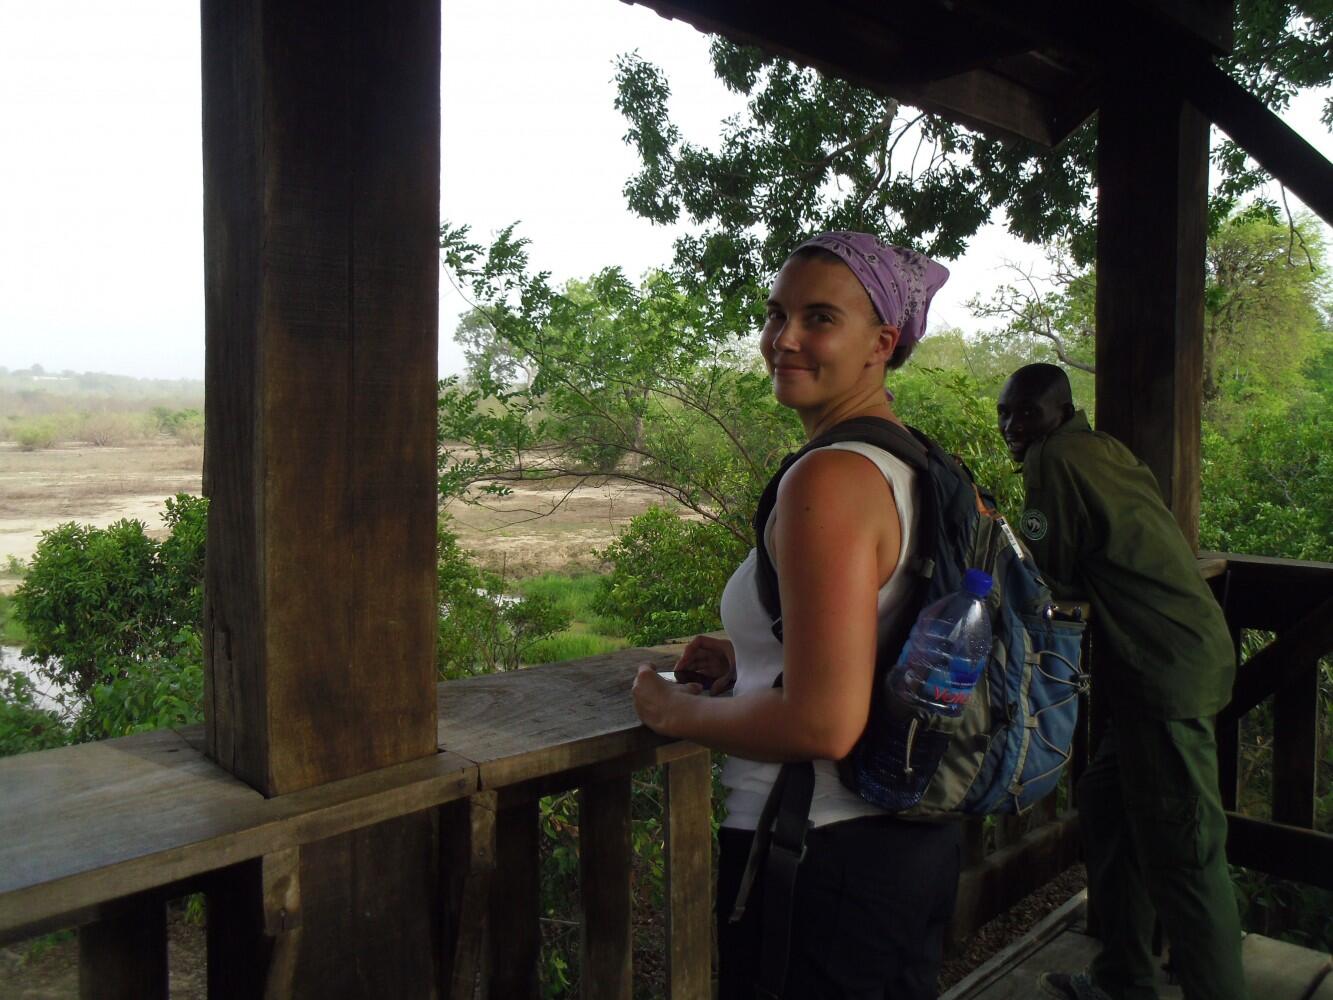 Meet McKenzie Johnson, assistant professor in NRES studying environmental policy within conflict